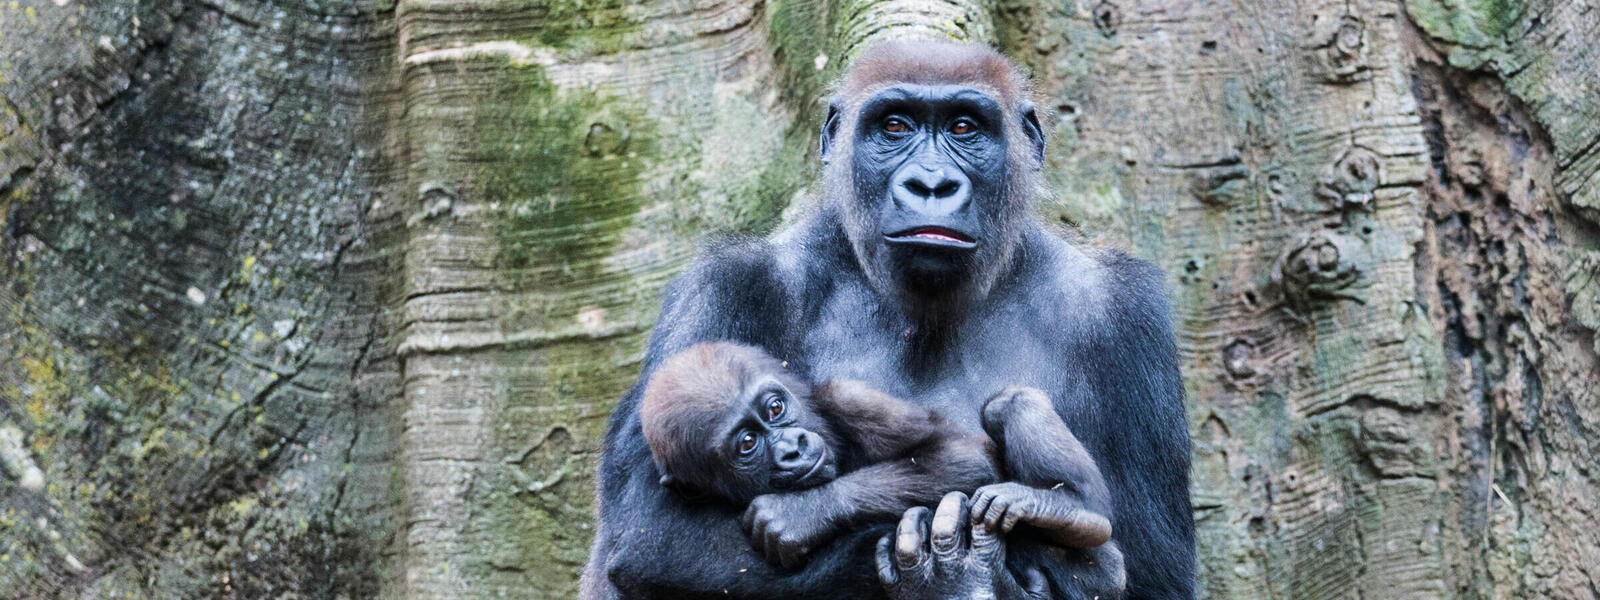 Cross river gorilla holding a baby